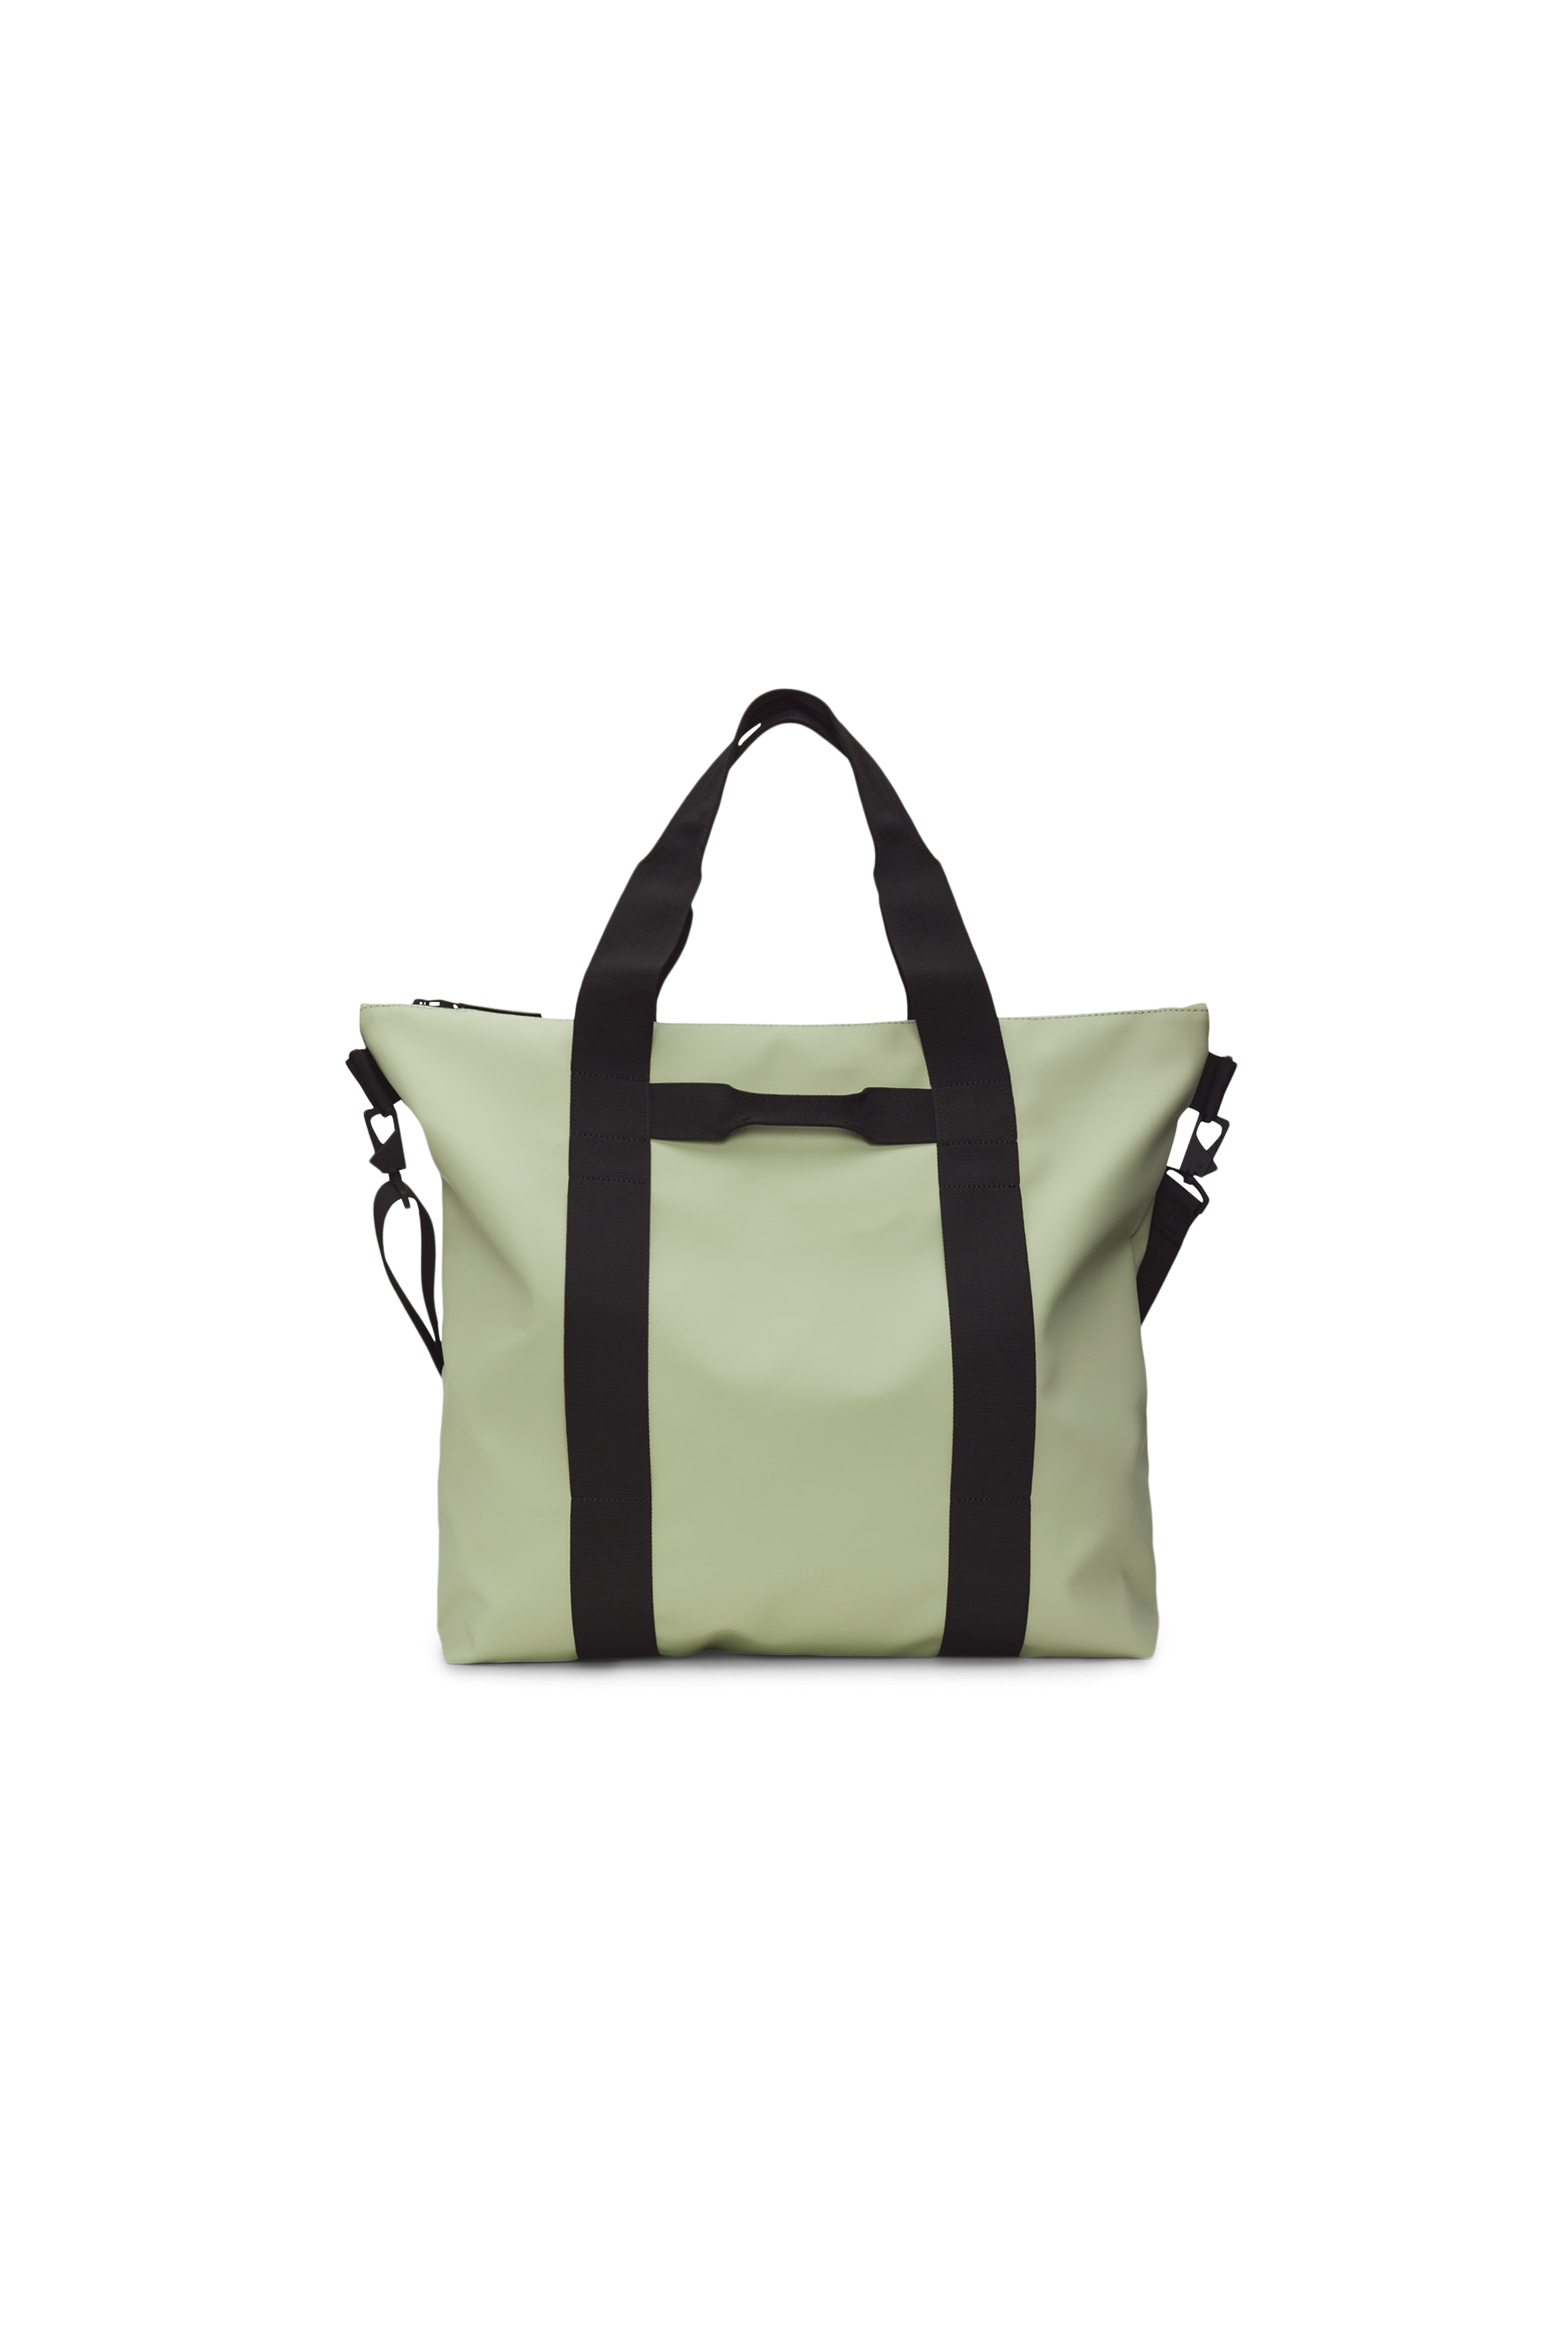 Rains® Tote Bag in Black for $110 | Free Shipping